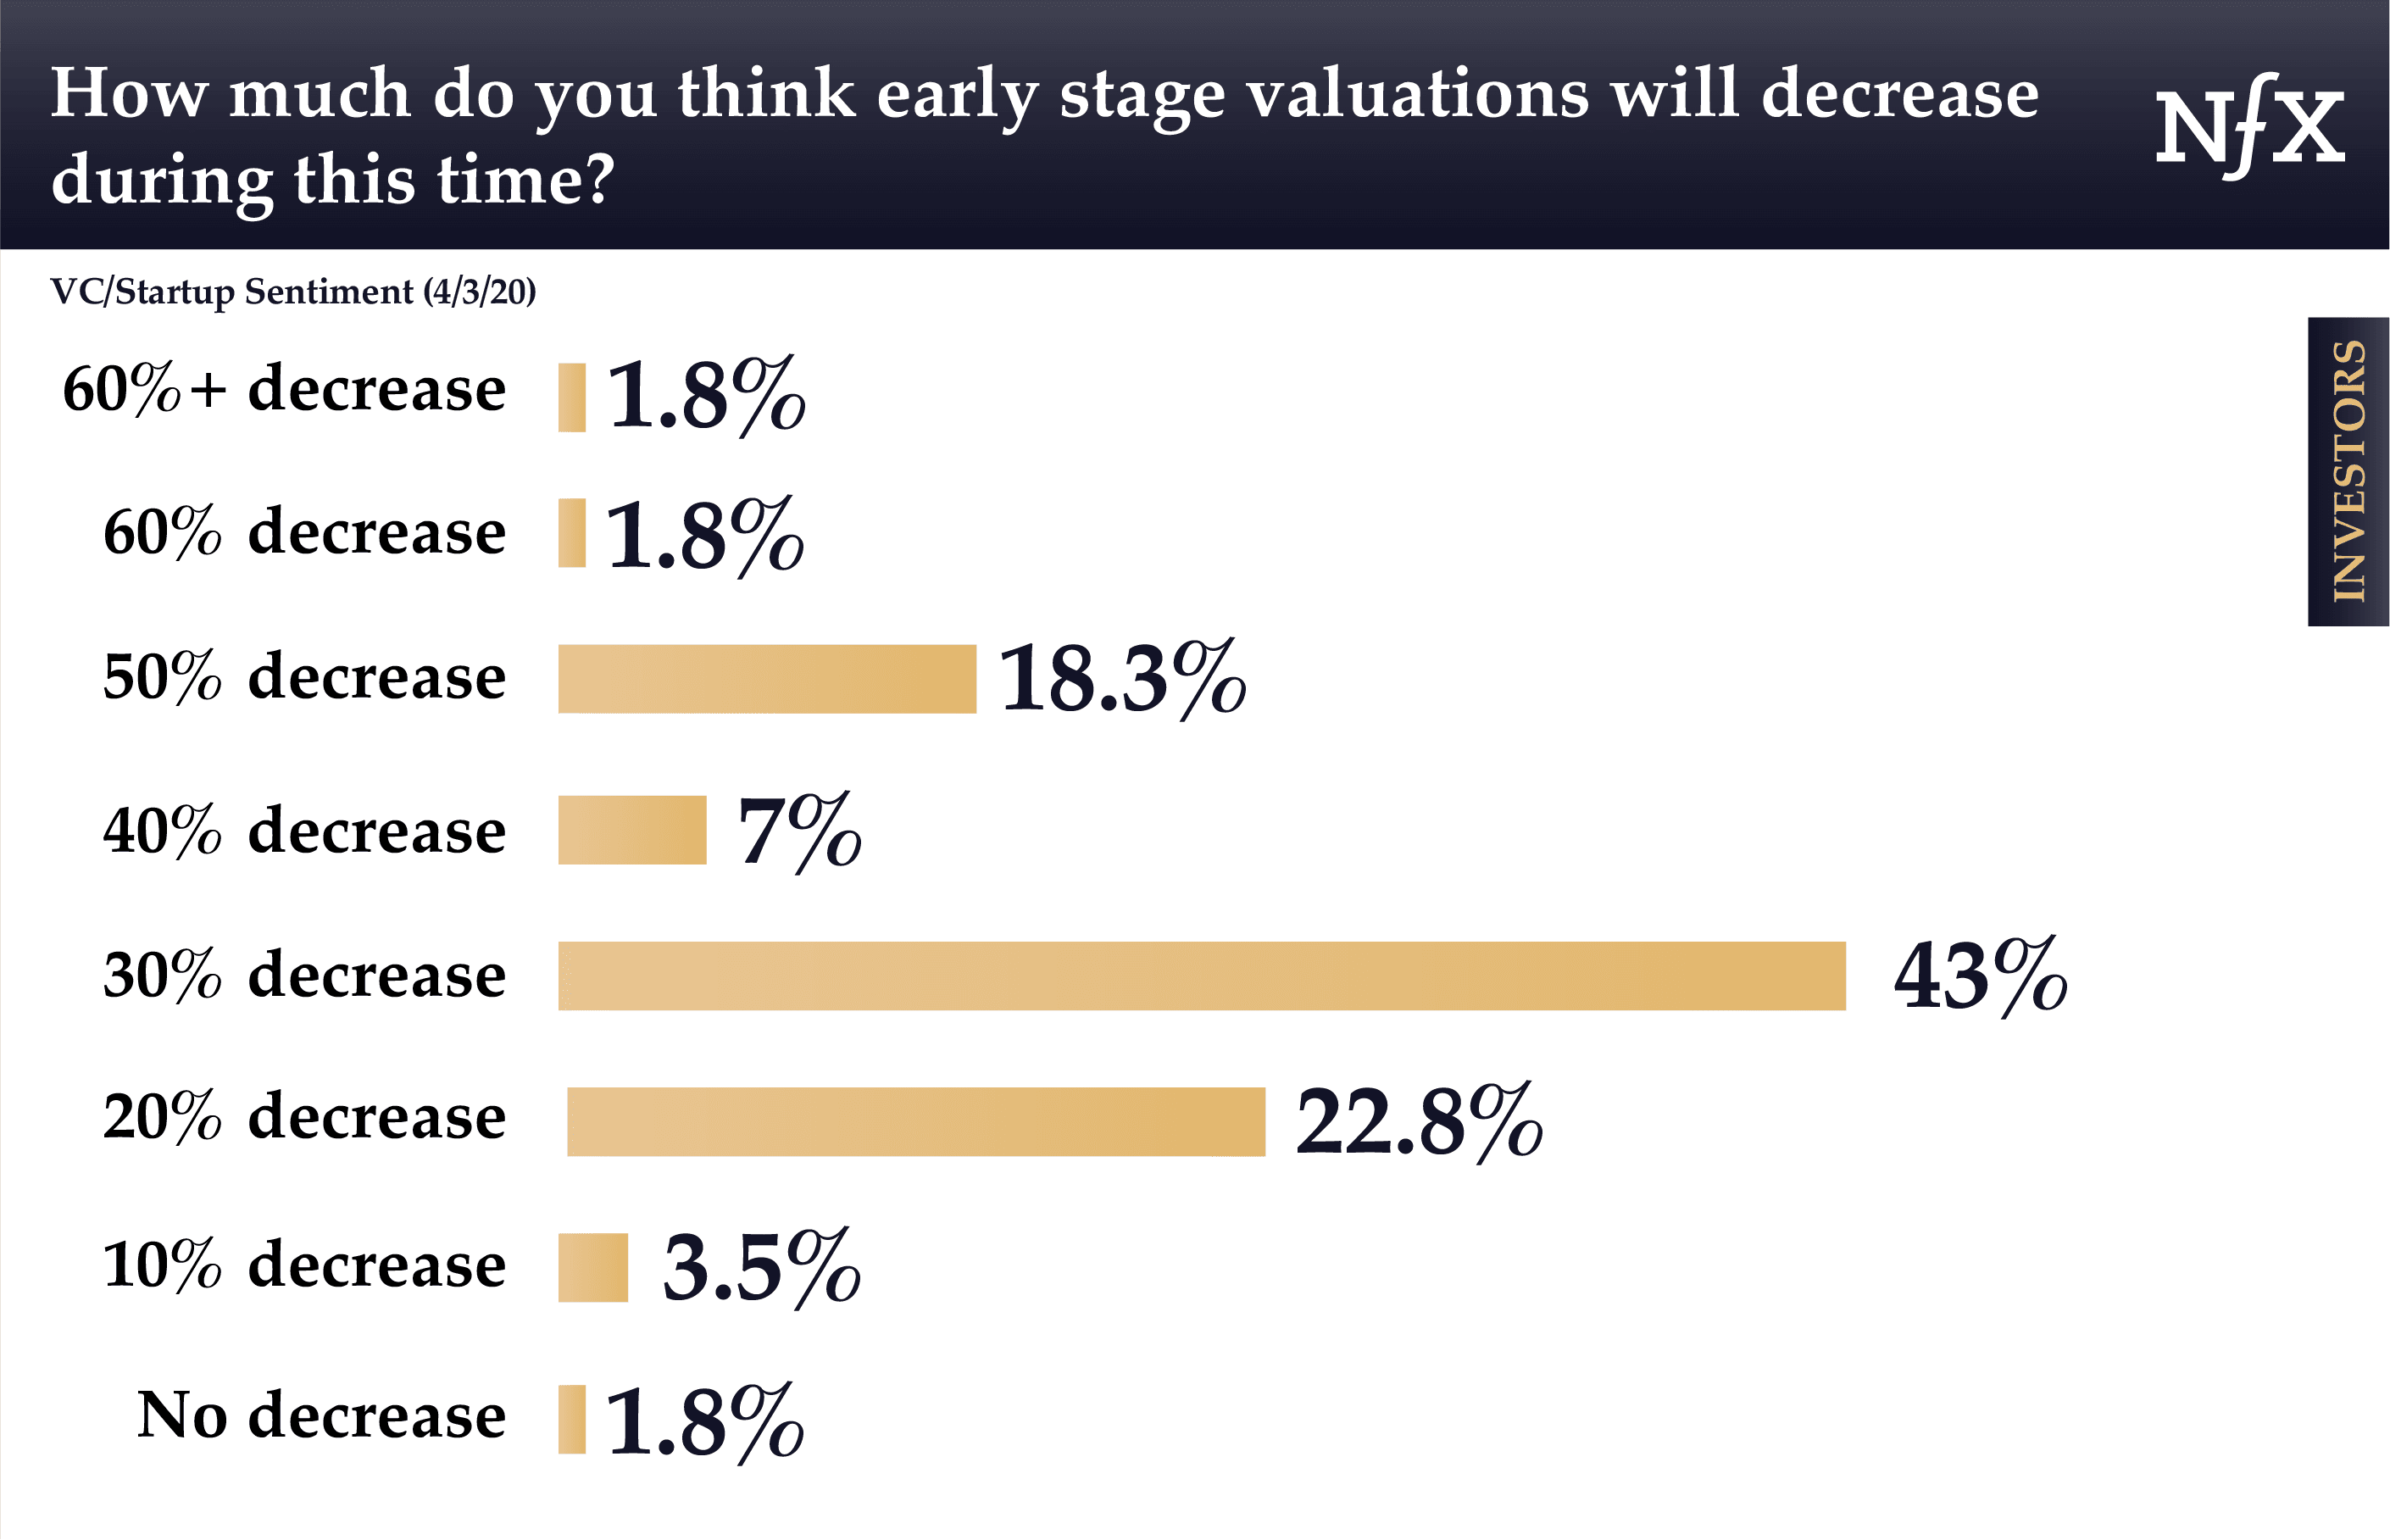 How much will early stage valuations decrease during COVID-19?